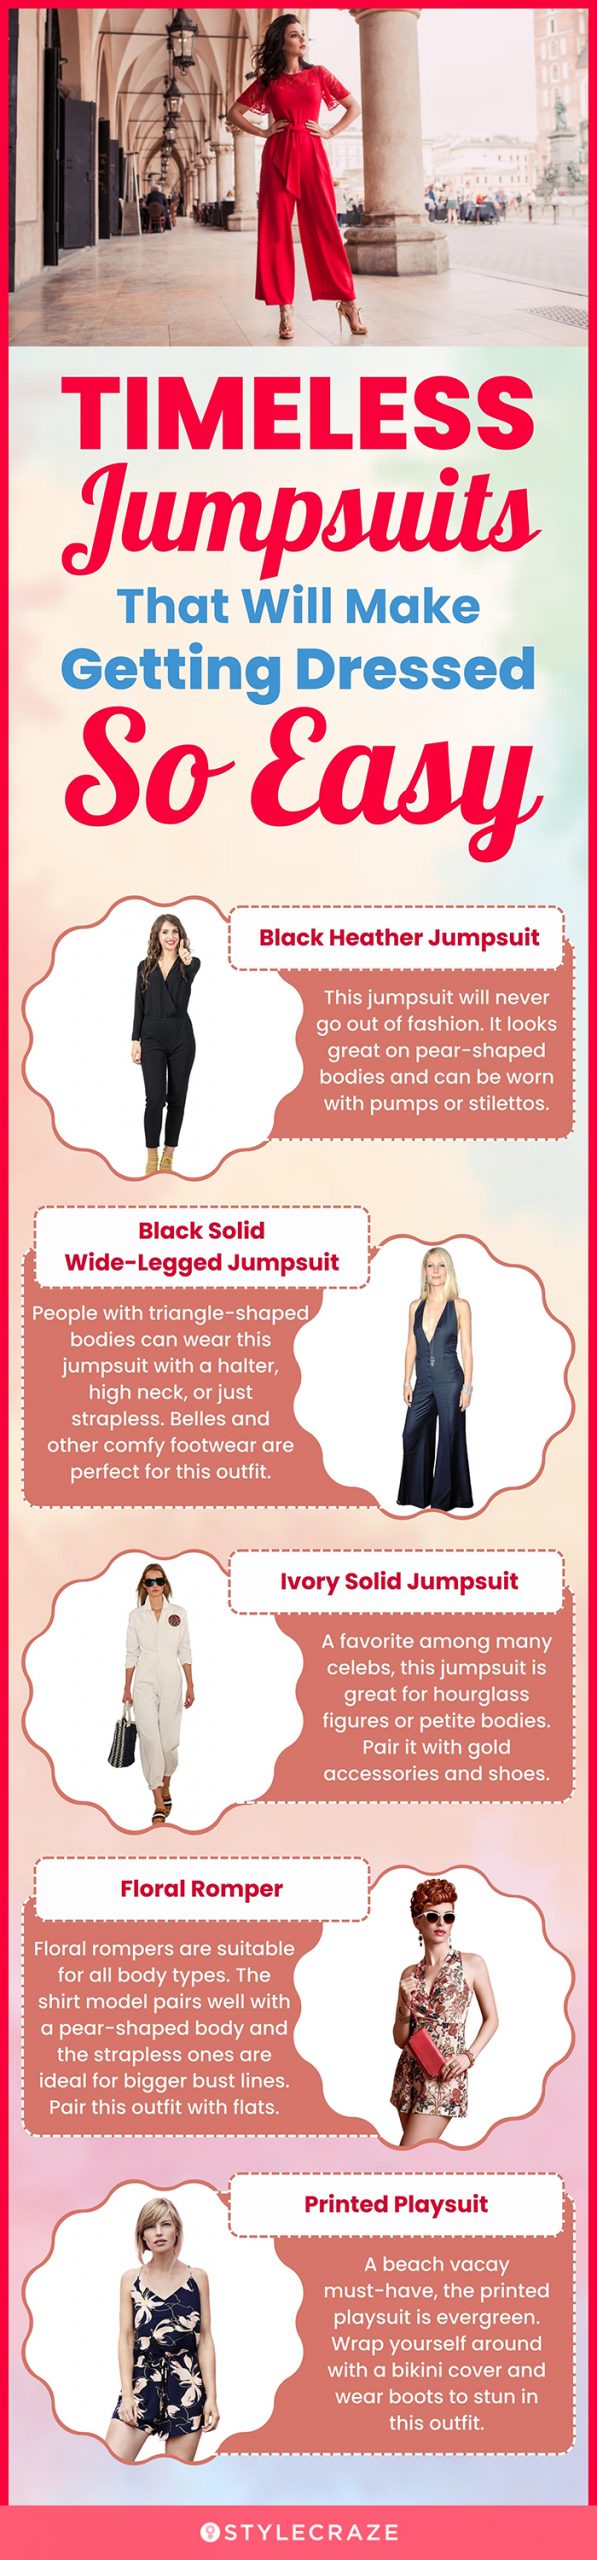 timeless jumpsuits that will make getting dressed so easy (infographic)